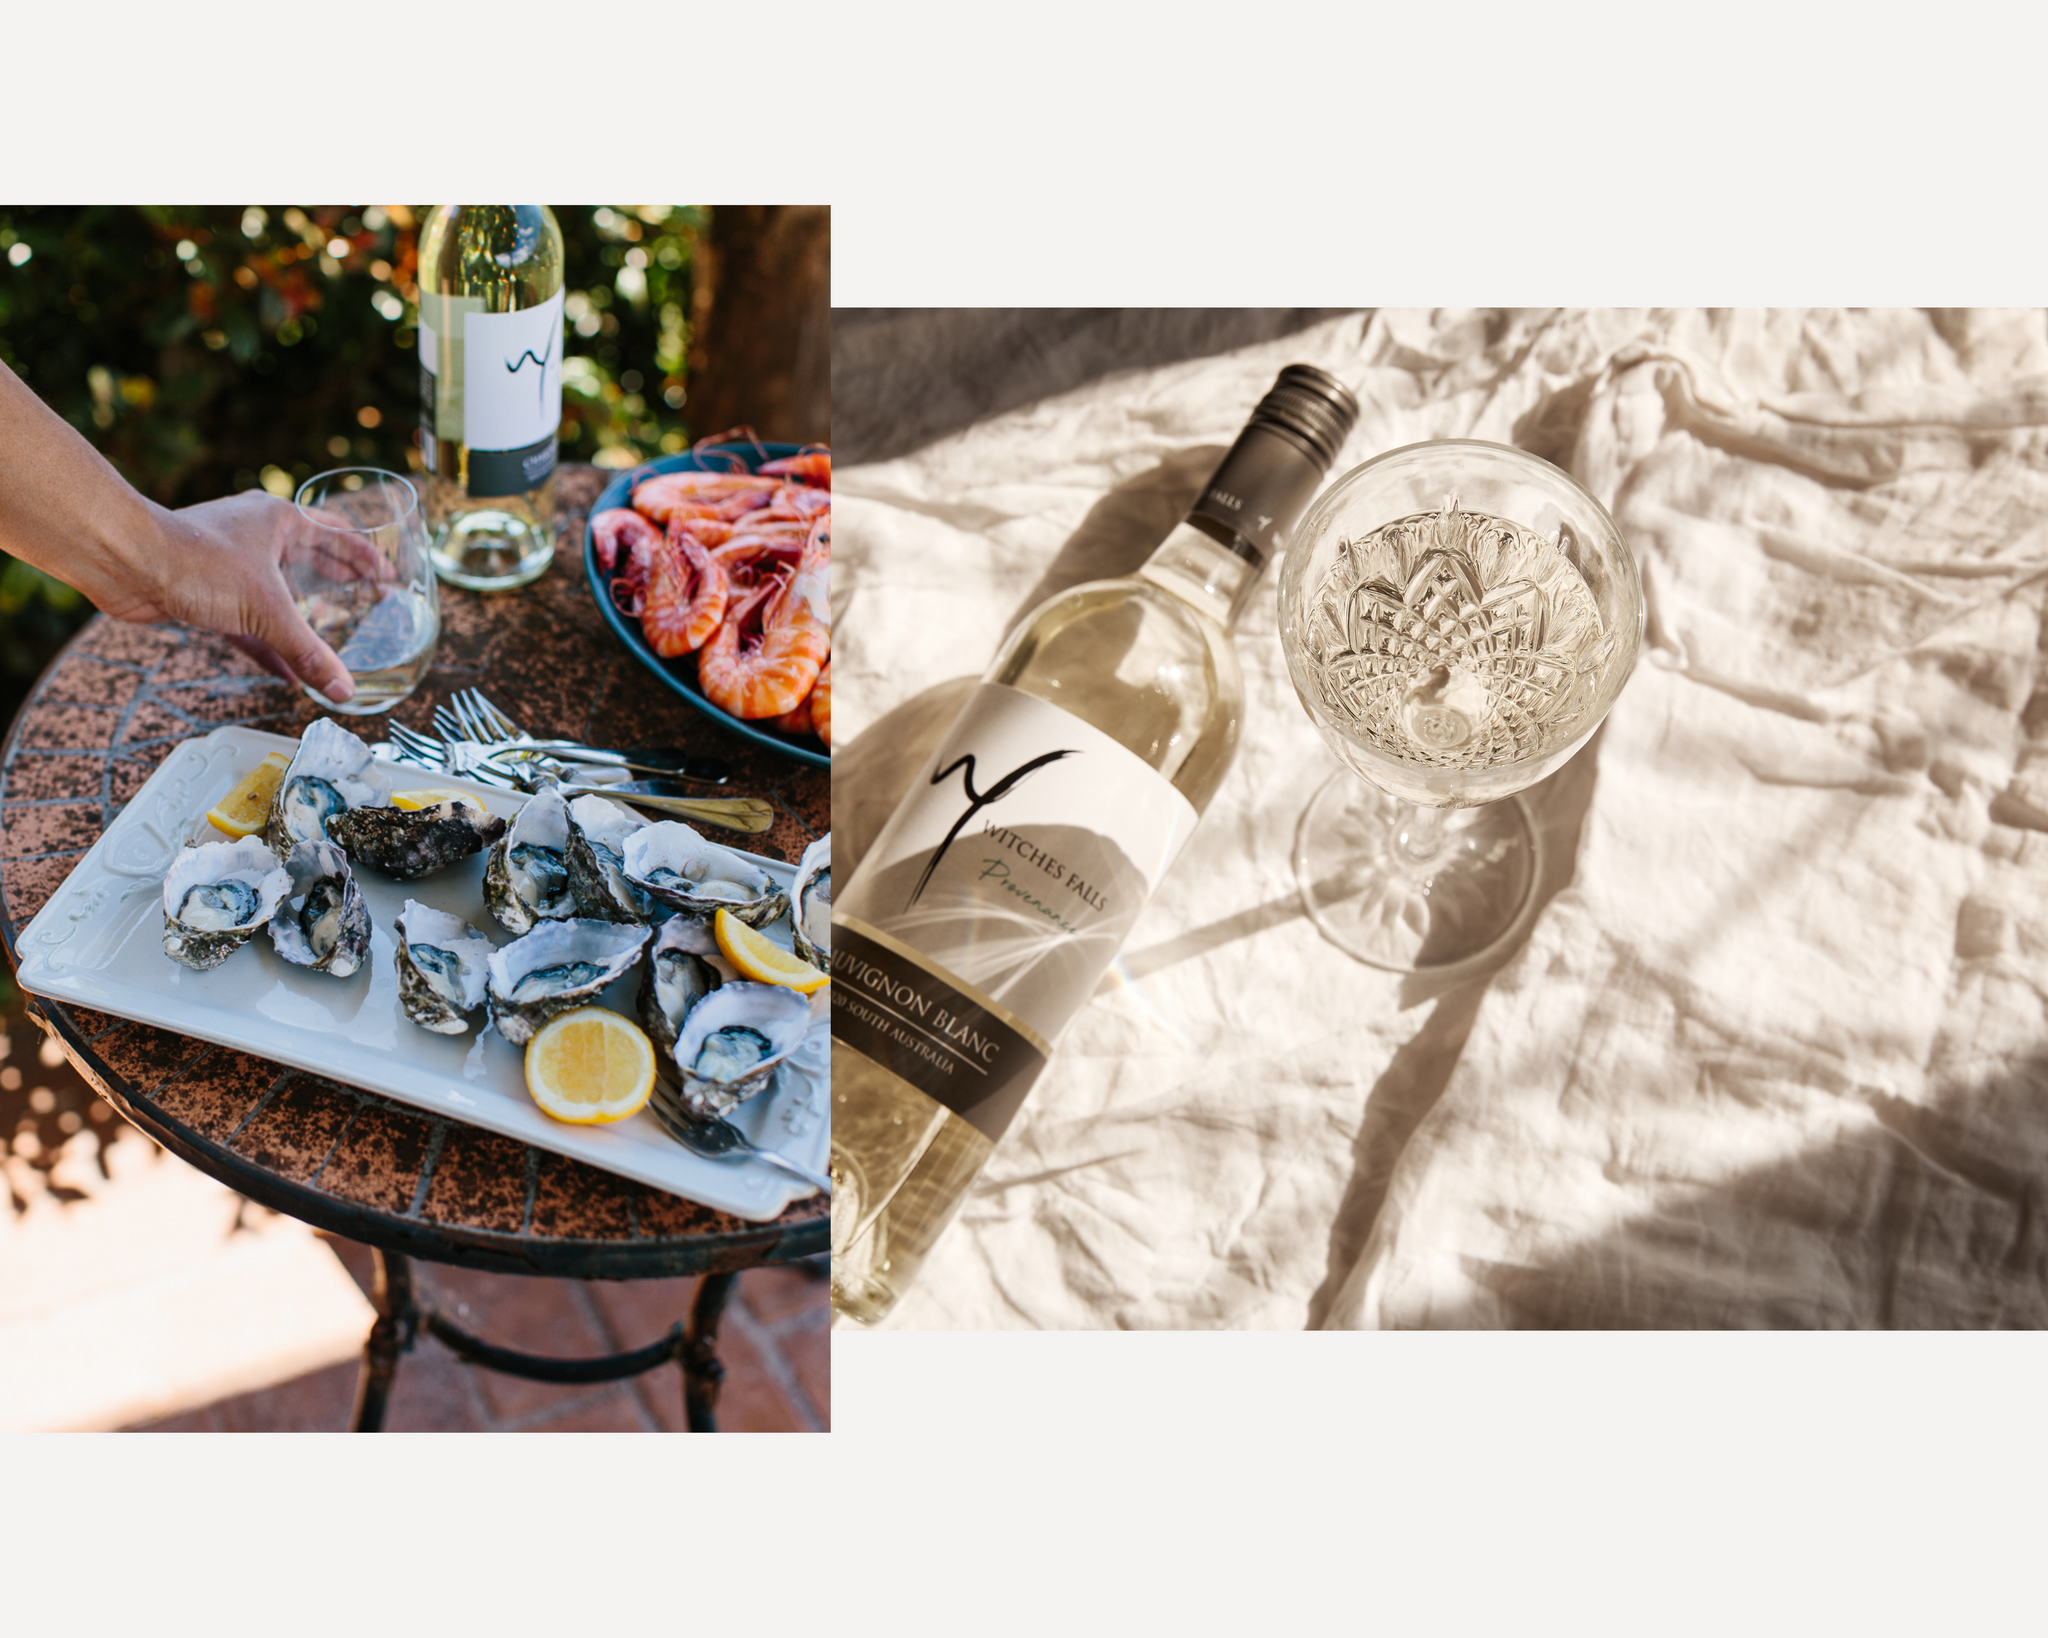 Left we see a plate of oysters and freshly cooked prawns; right we see a bottle and glass of sauvignon blanc